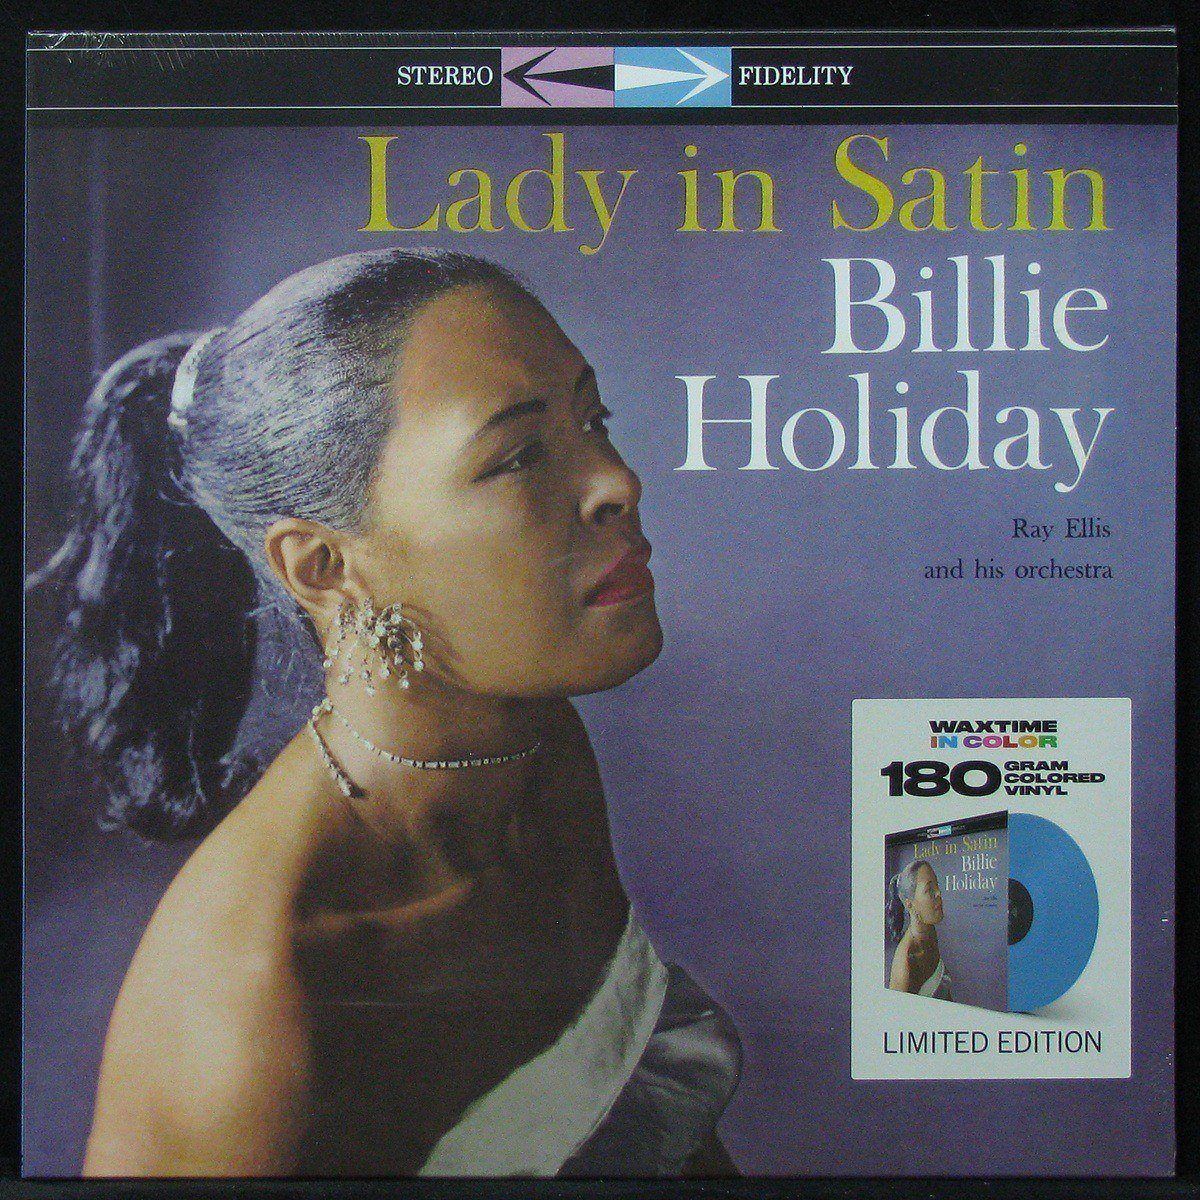 Billie Holiday - Lady In Satin (coloured vinyl) .